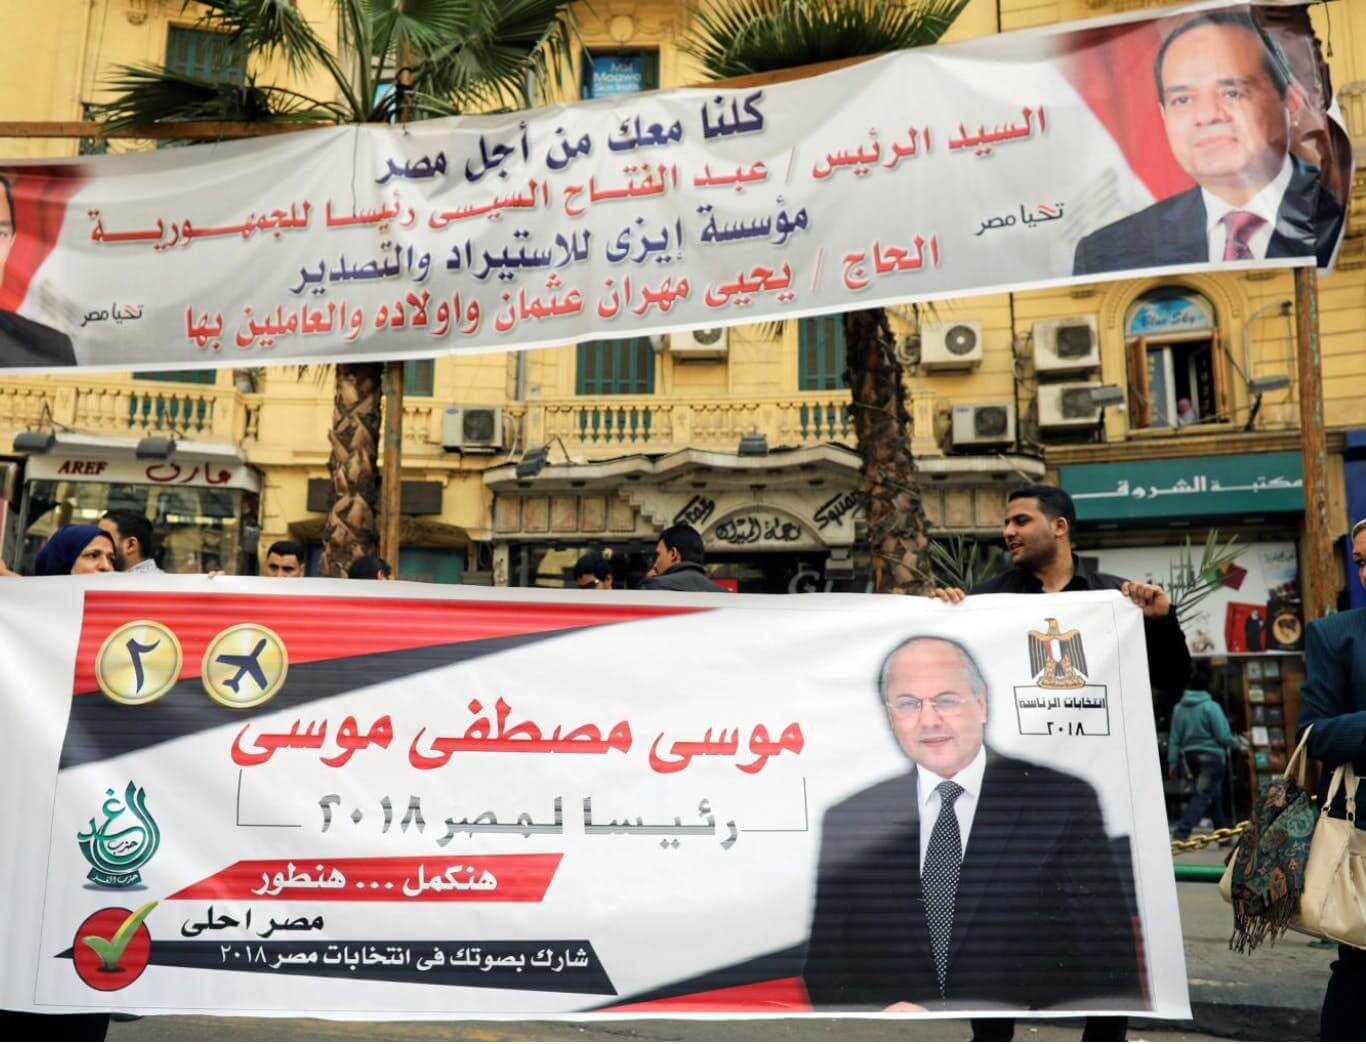 Sisi's only challenger lays low ahead of Egyptian election